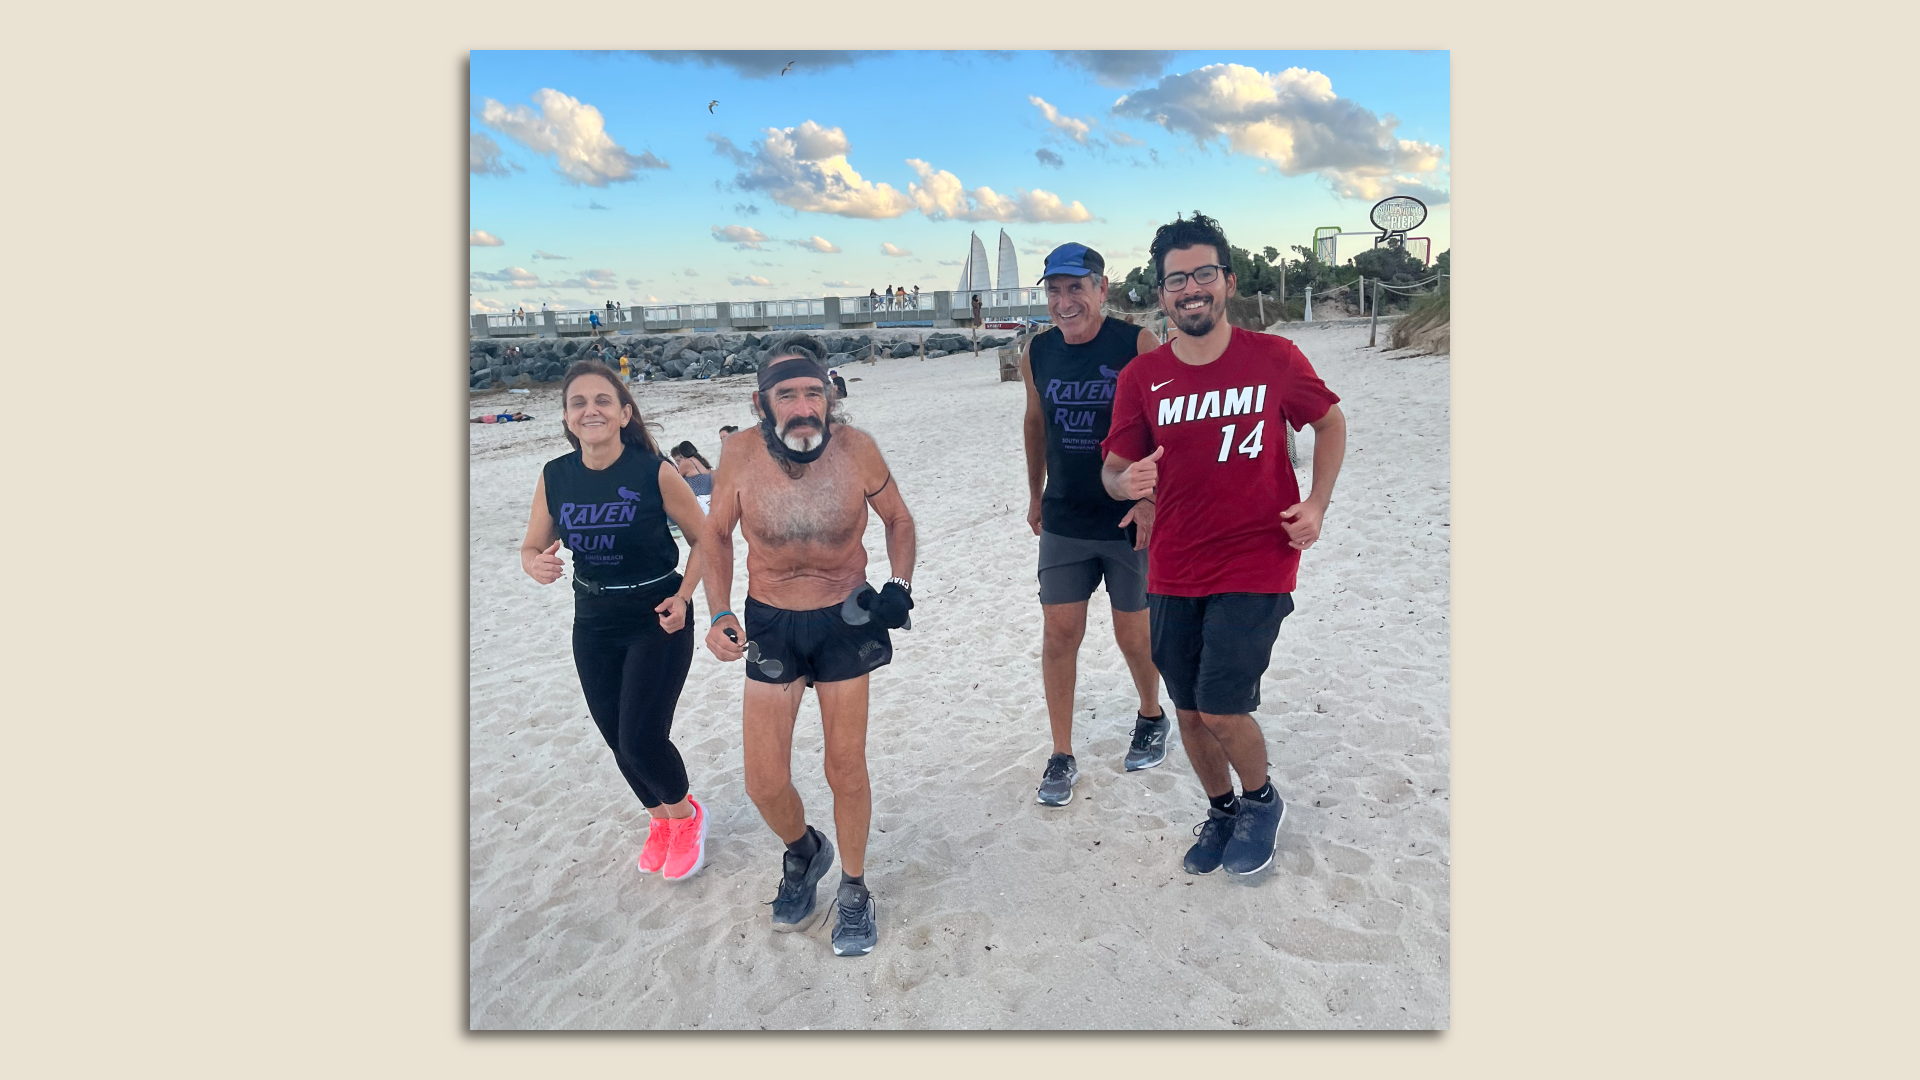 A group of runners jogs on the beach in Miami.